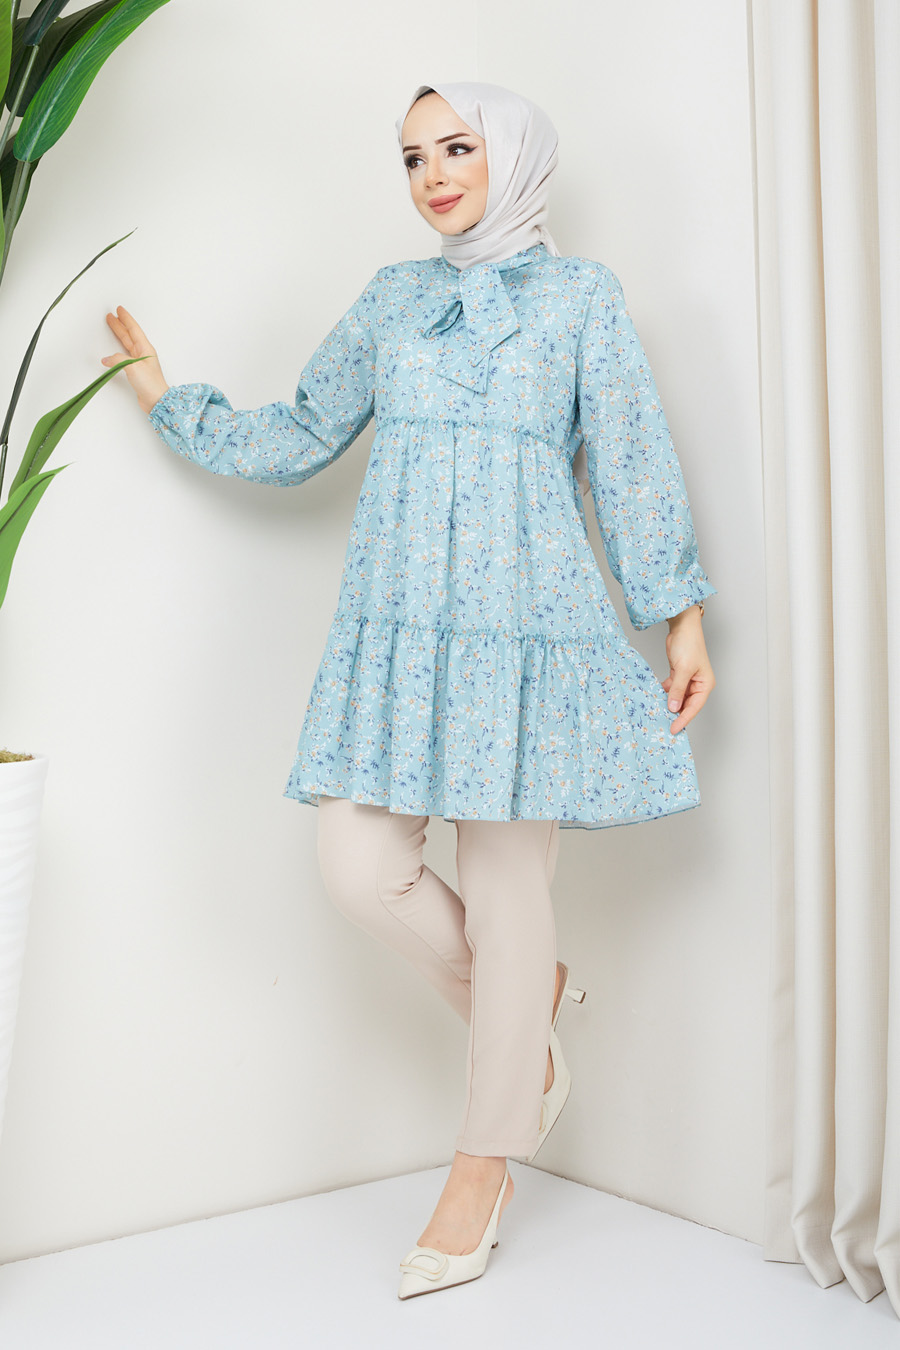 Tunic and Pant Suit - Baby Blue